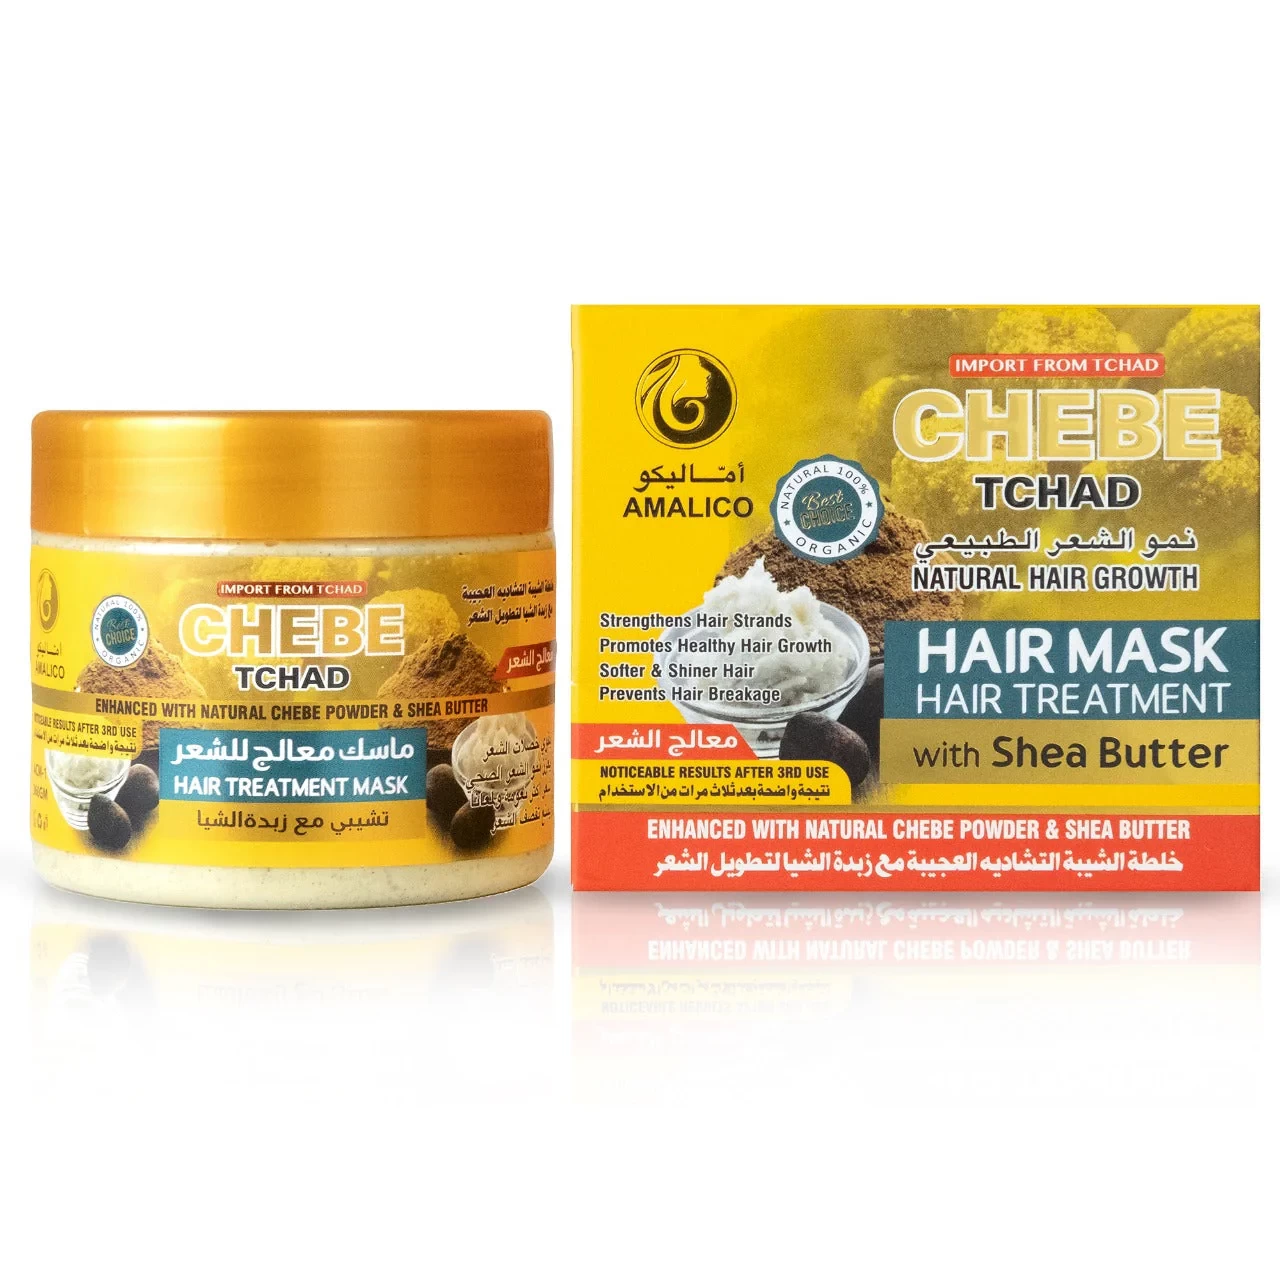 Amalico Chebe Powder And Shea Butter Hair Treatment Mask 360GM